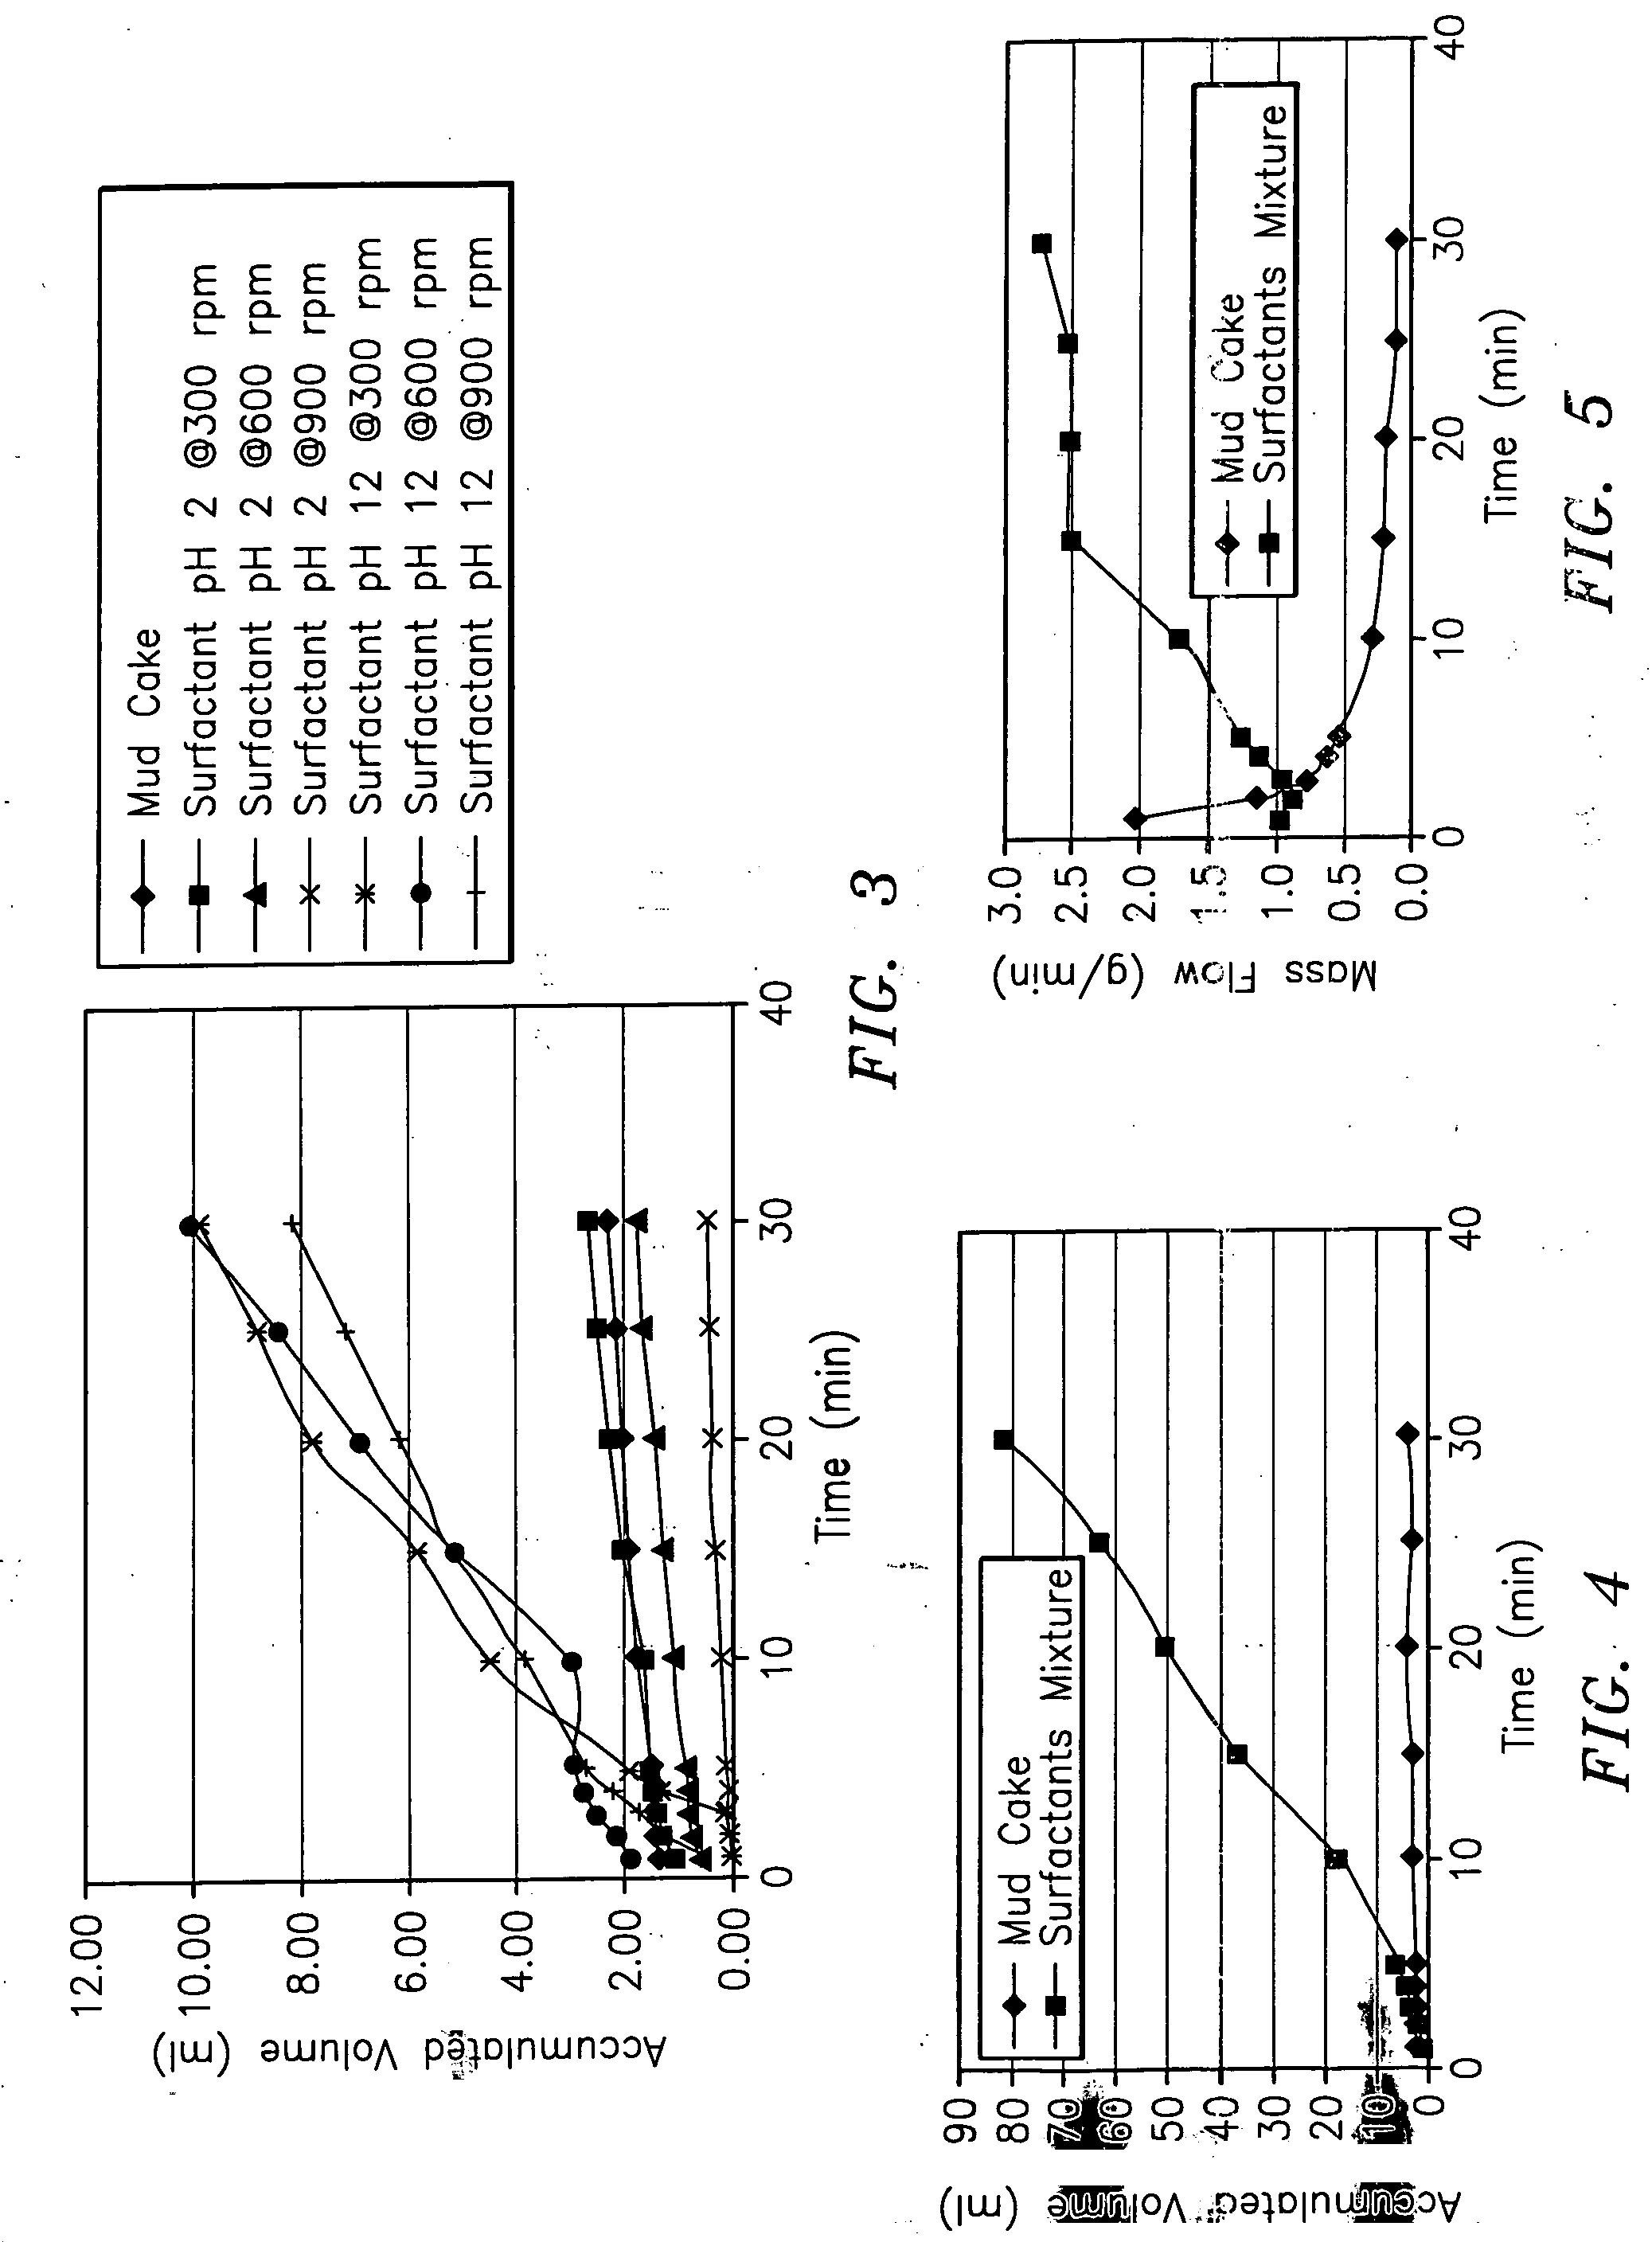 Surfactant package for well treatment and method using same